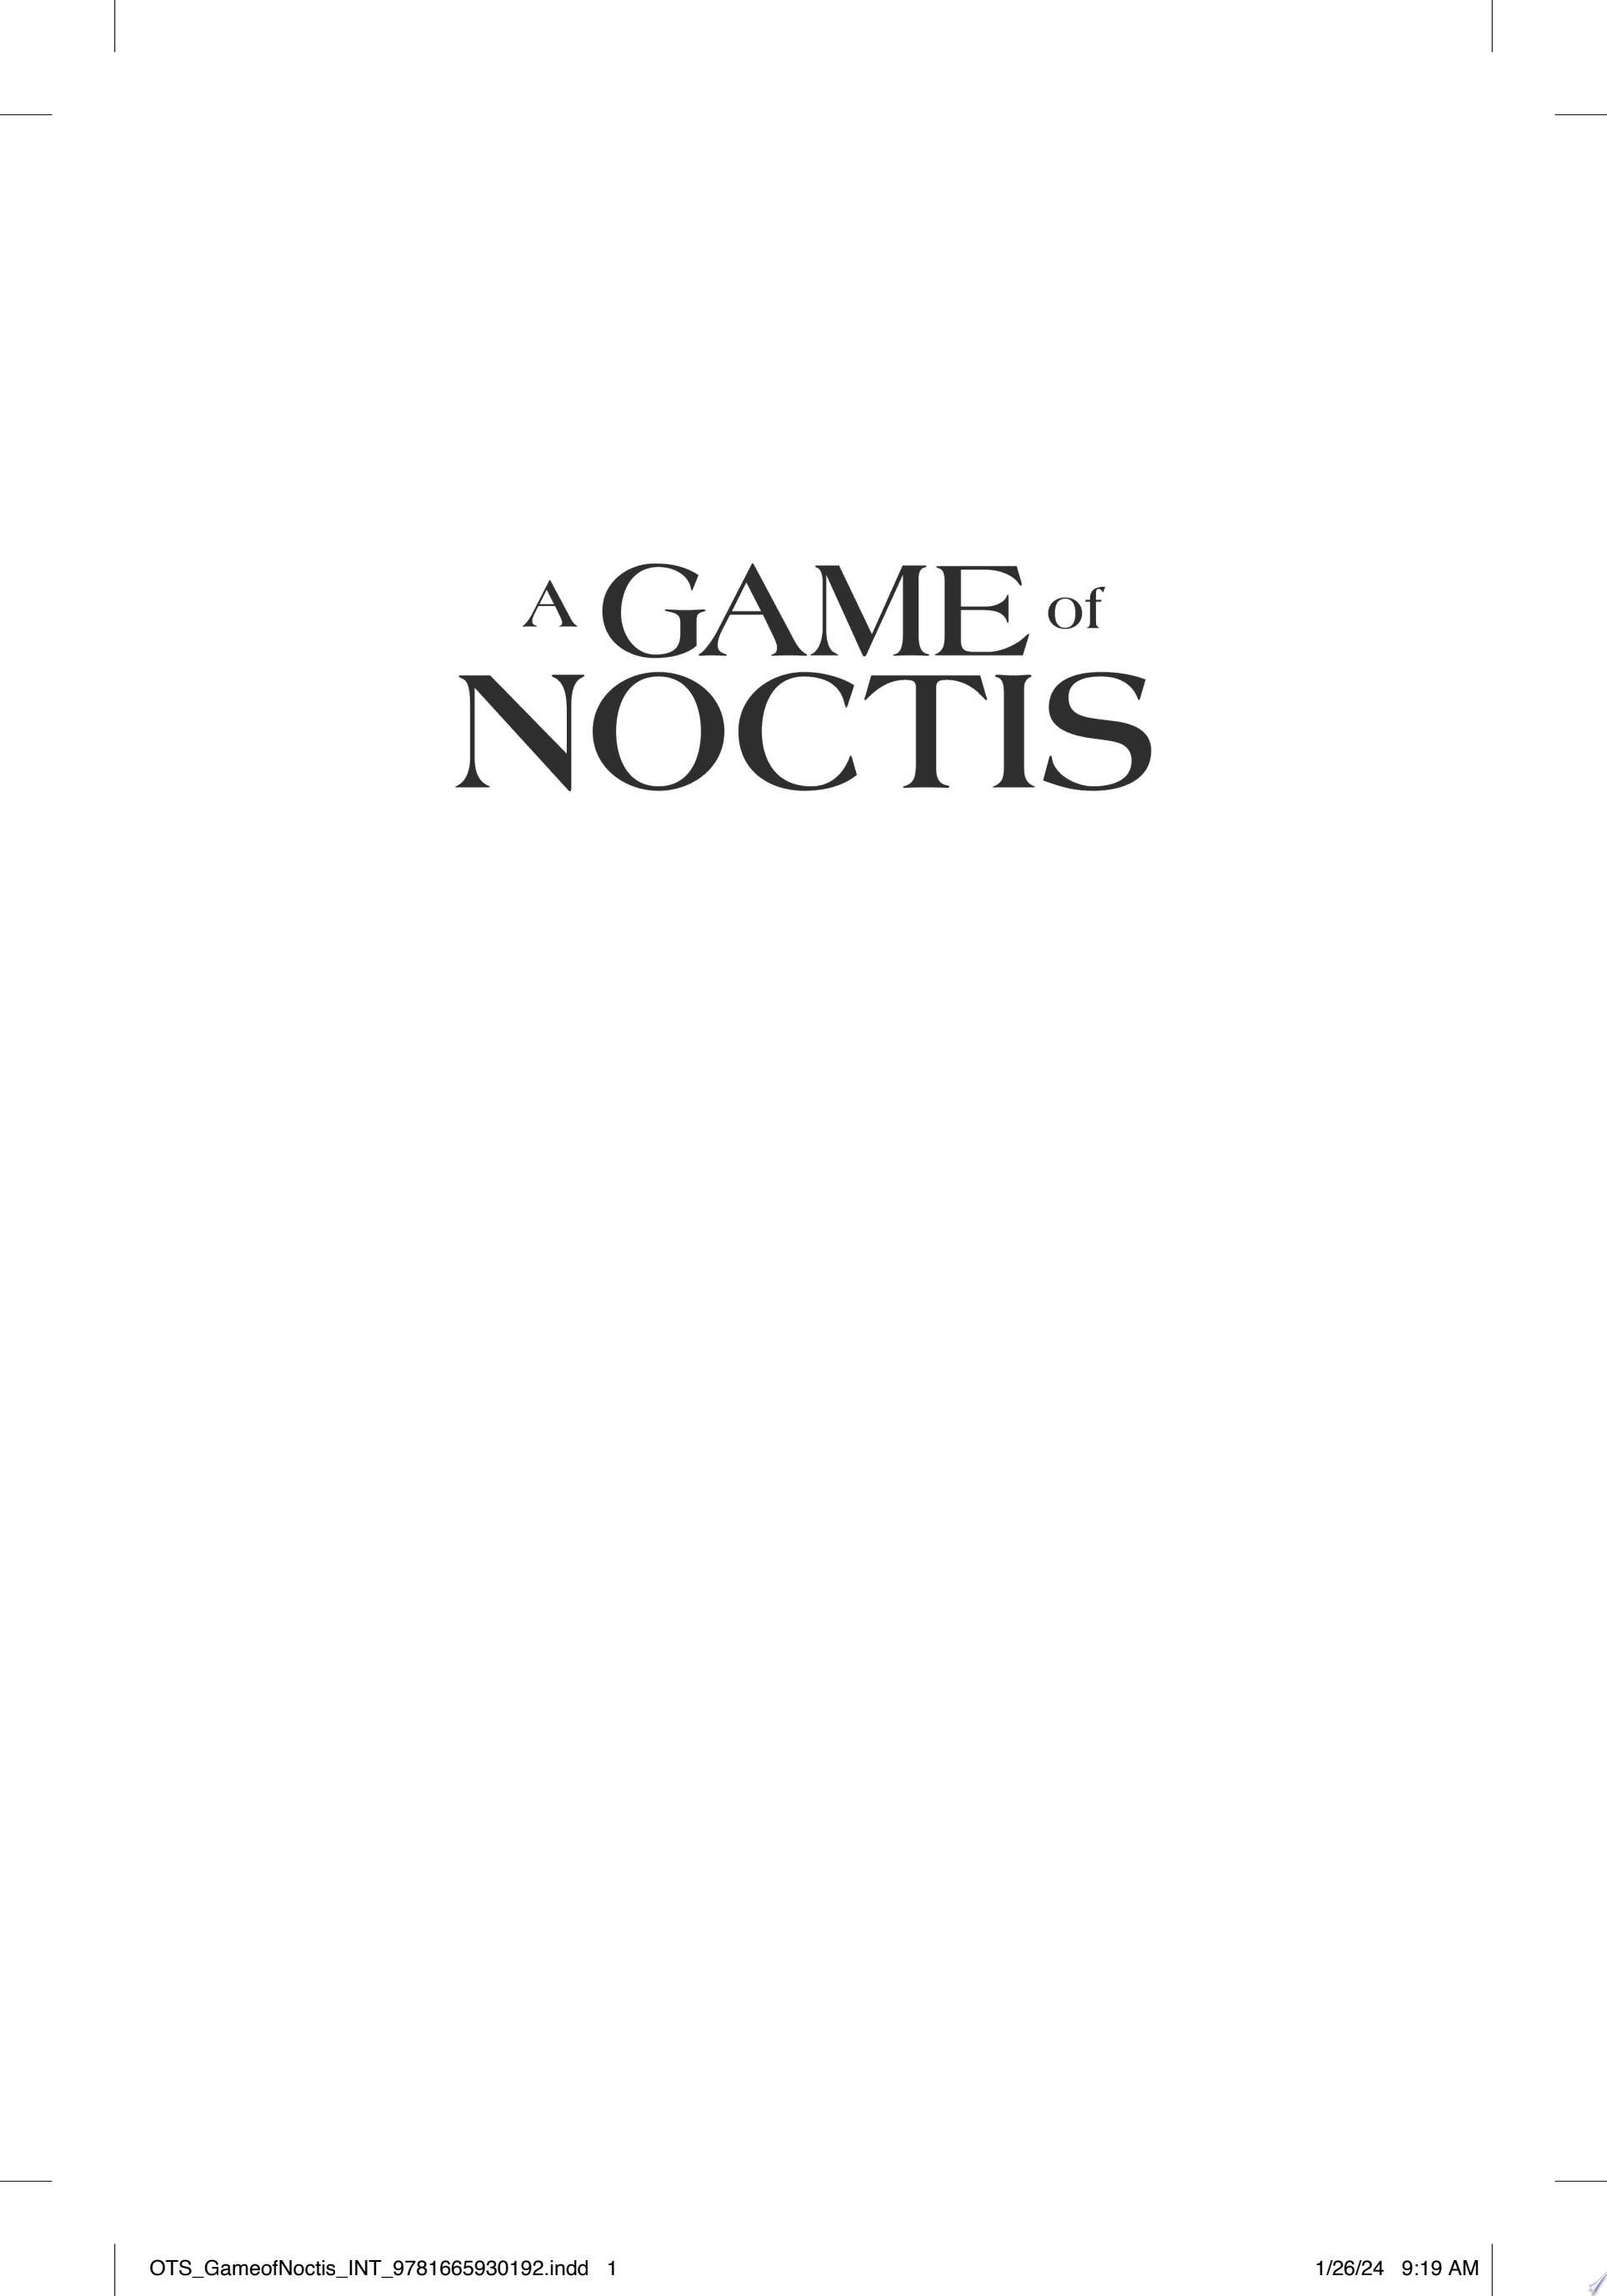 Image for "A Game of Noctis"